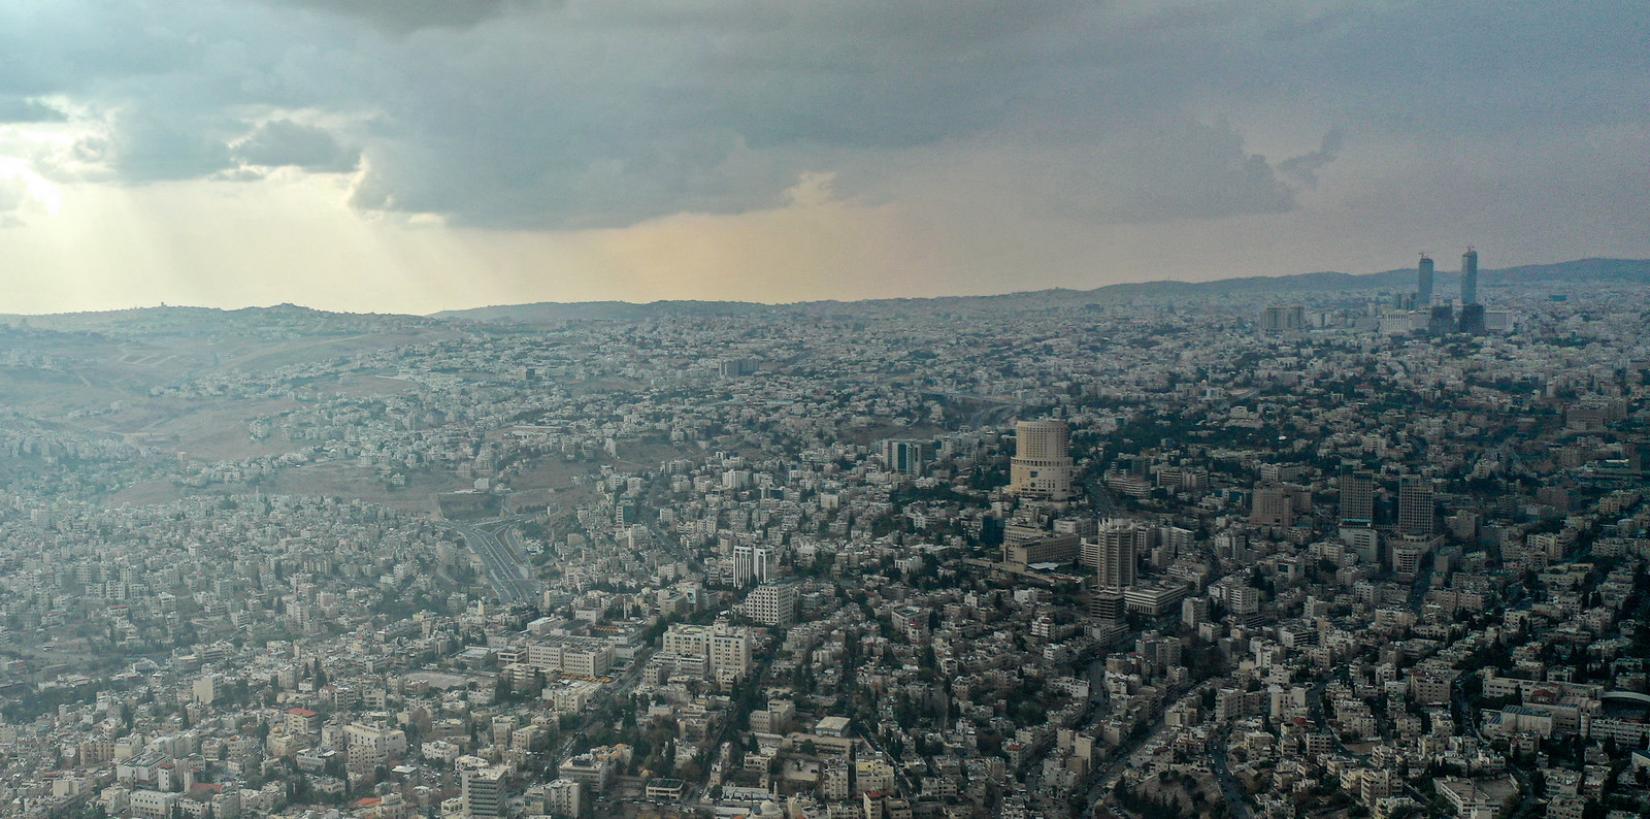 Amman from the sky